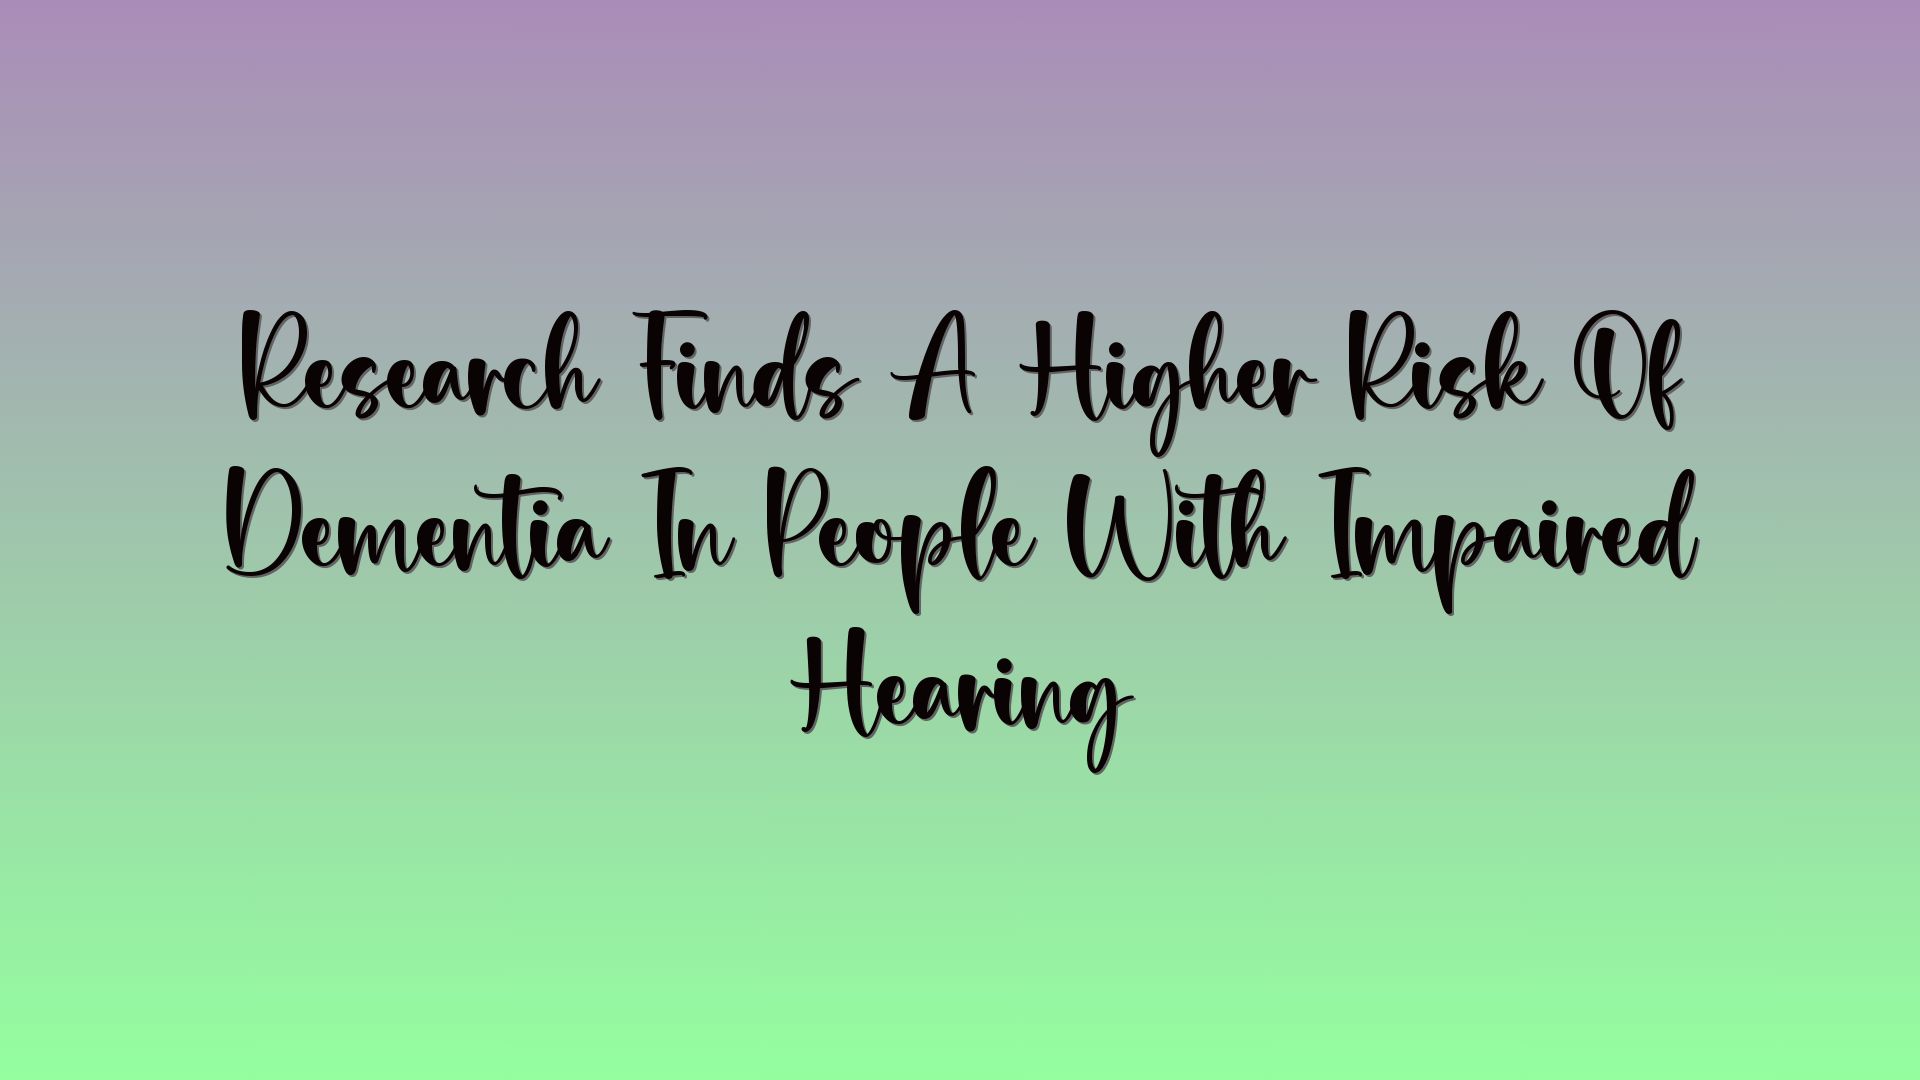 Research Finds A Higher Risk Of Dementia In People With Impaired Hearing